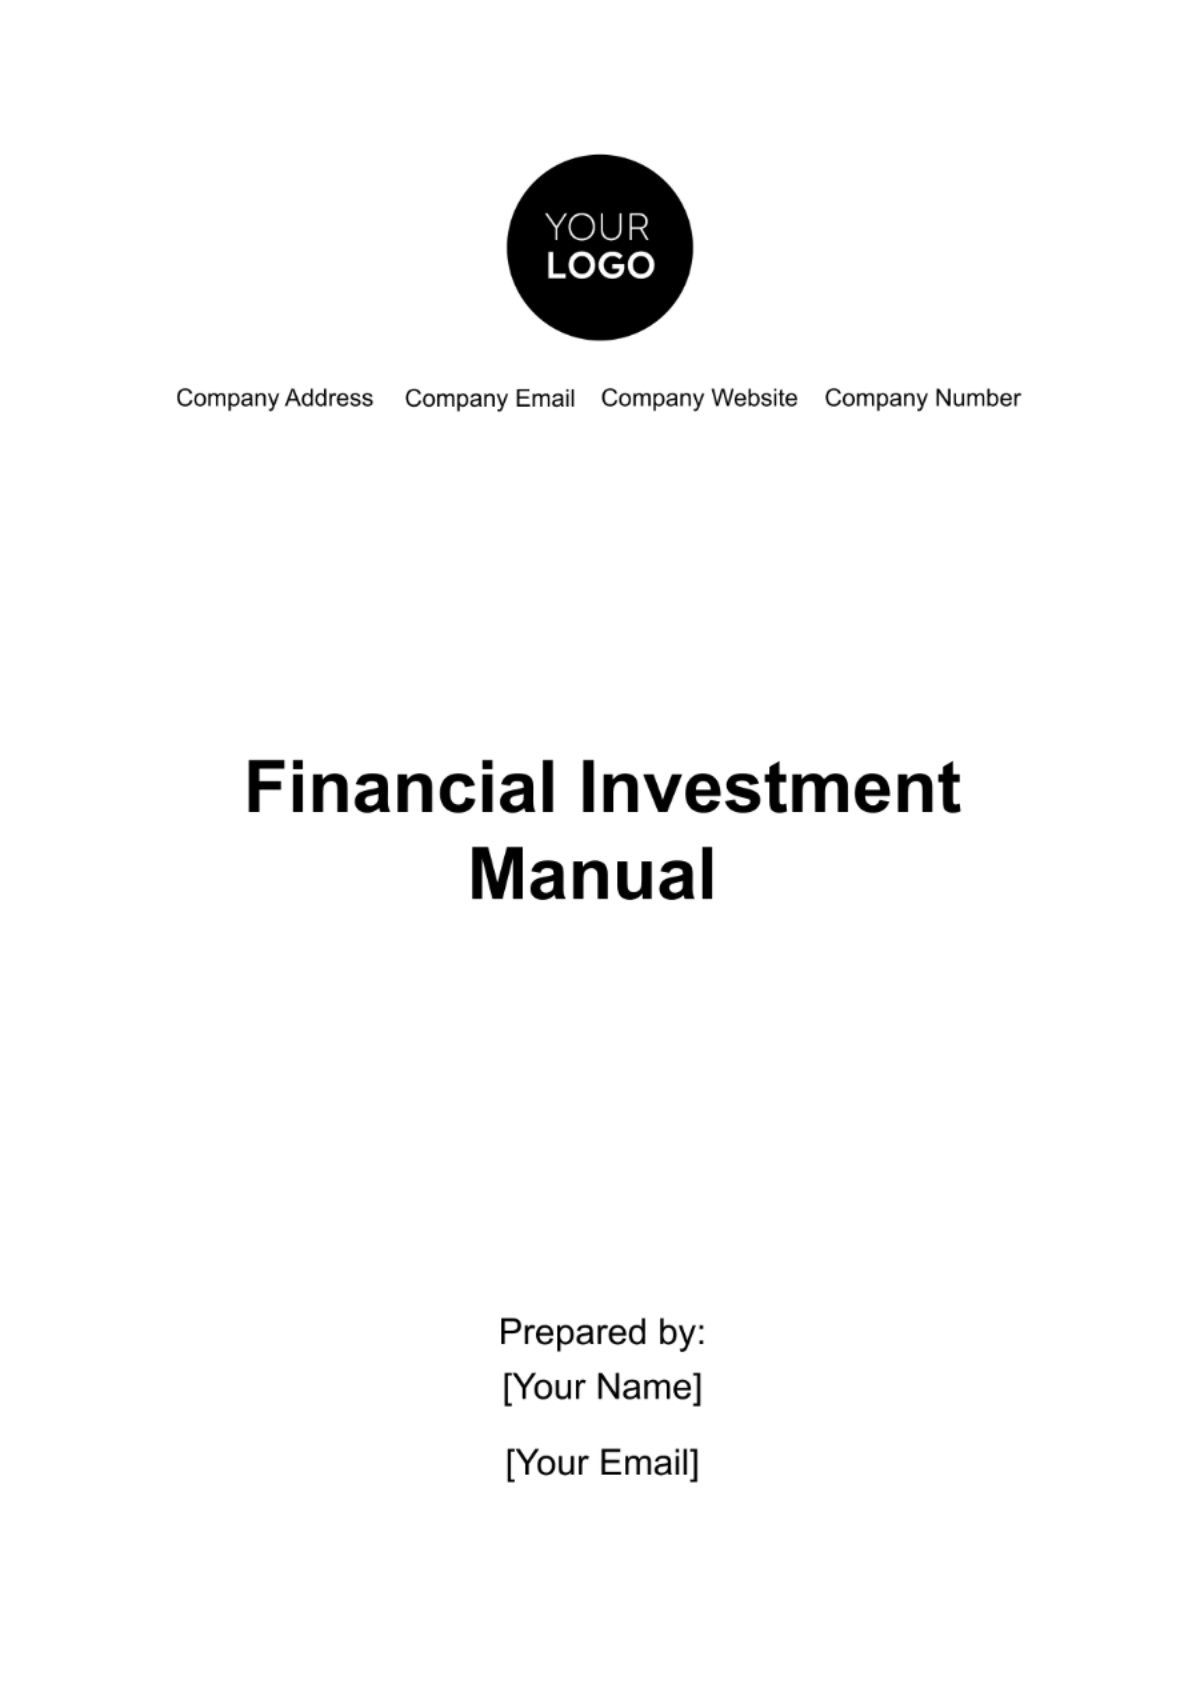 Financial Investment Manual Template